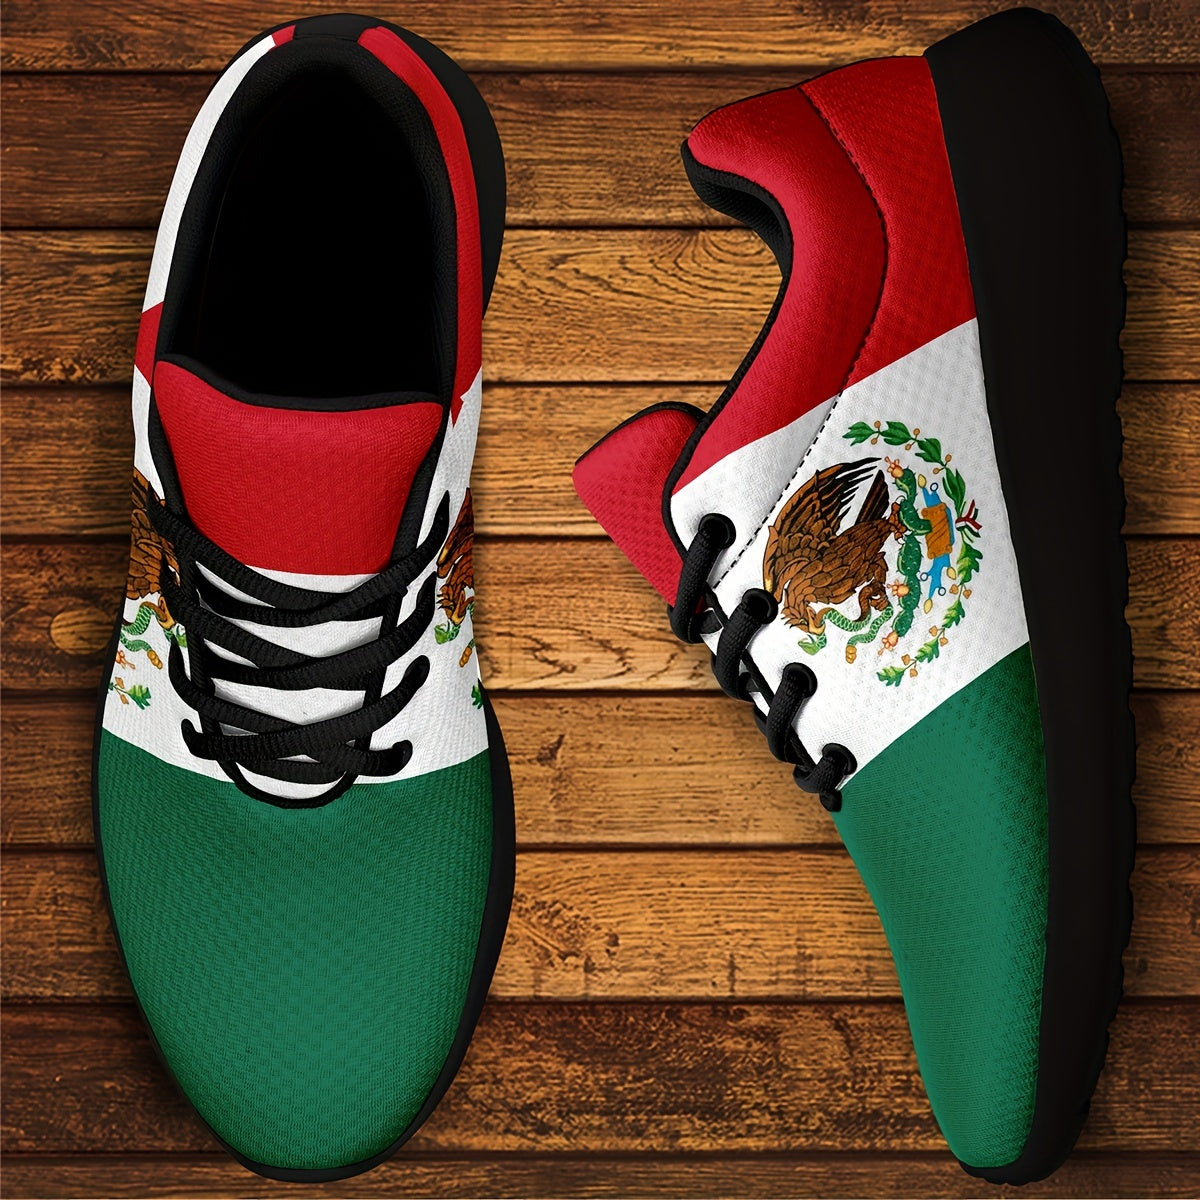 Mexico National Flag Pattern Sneakers - Plus Size Men's Casual Soft Sole Lace-Up Shoes